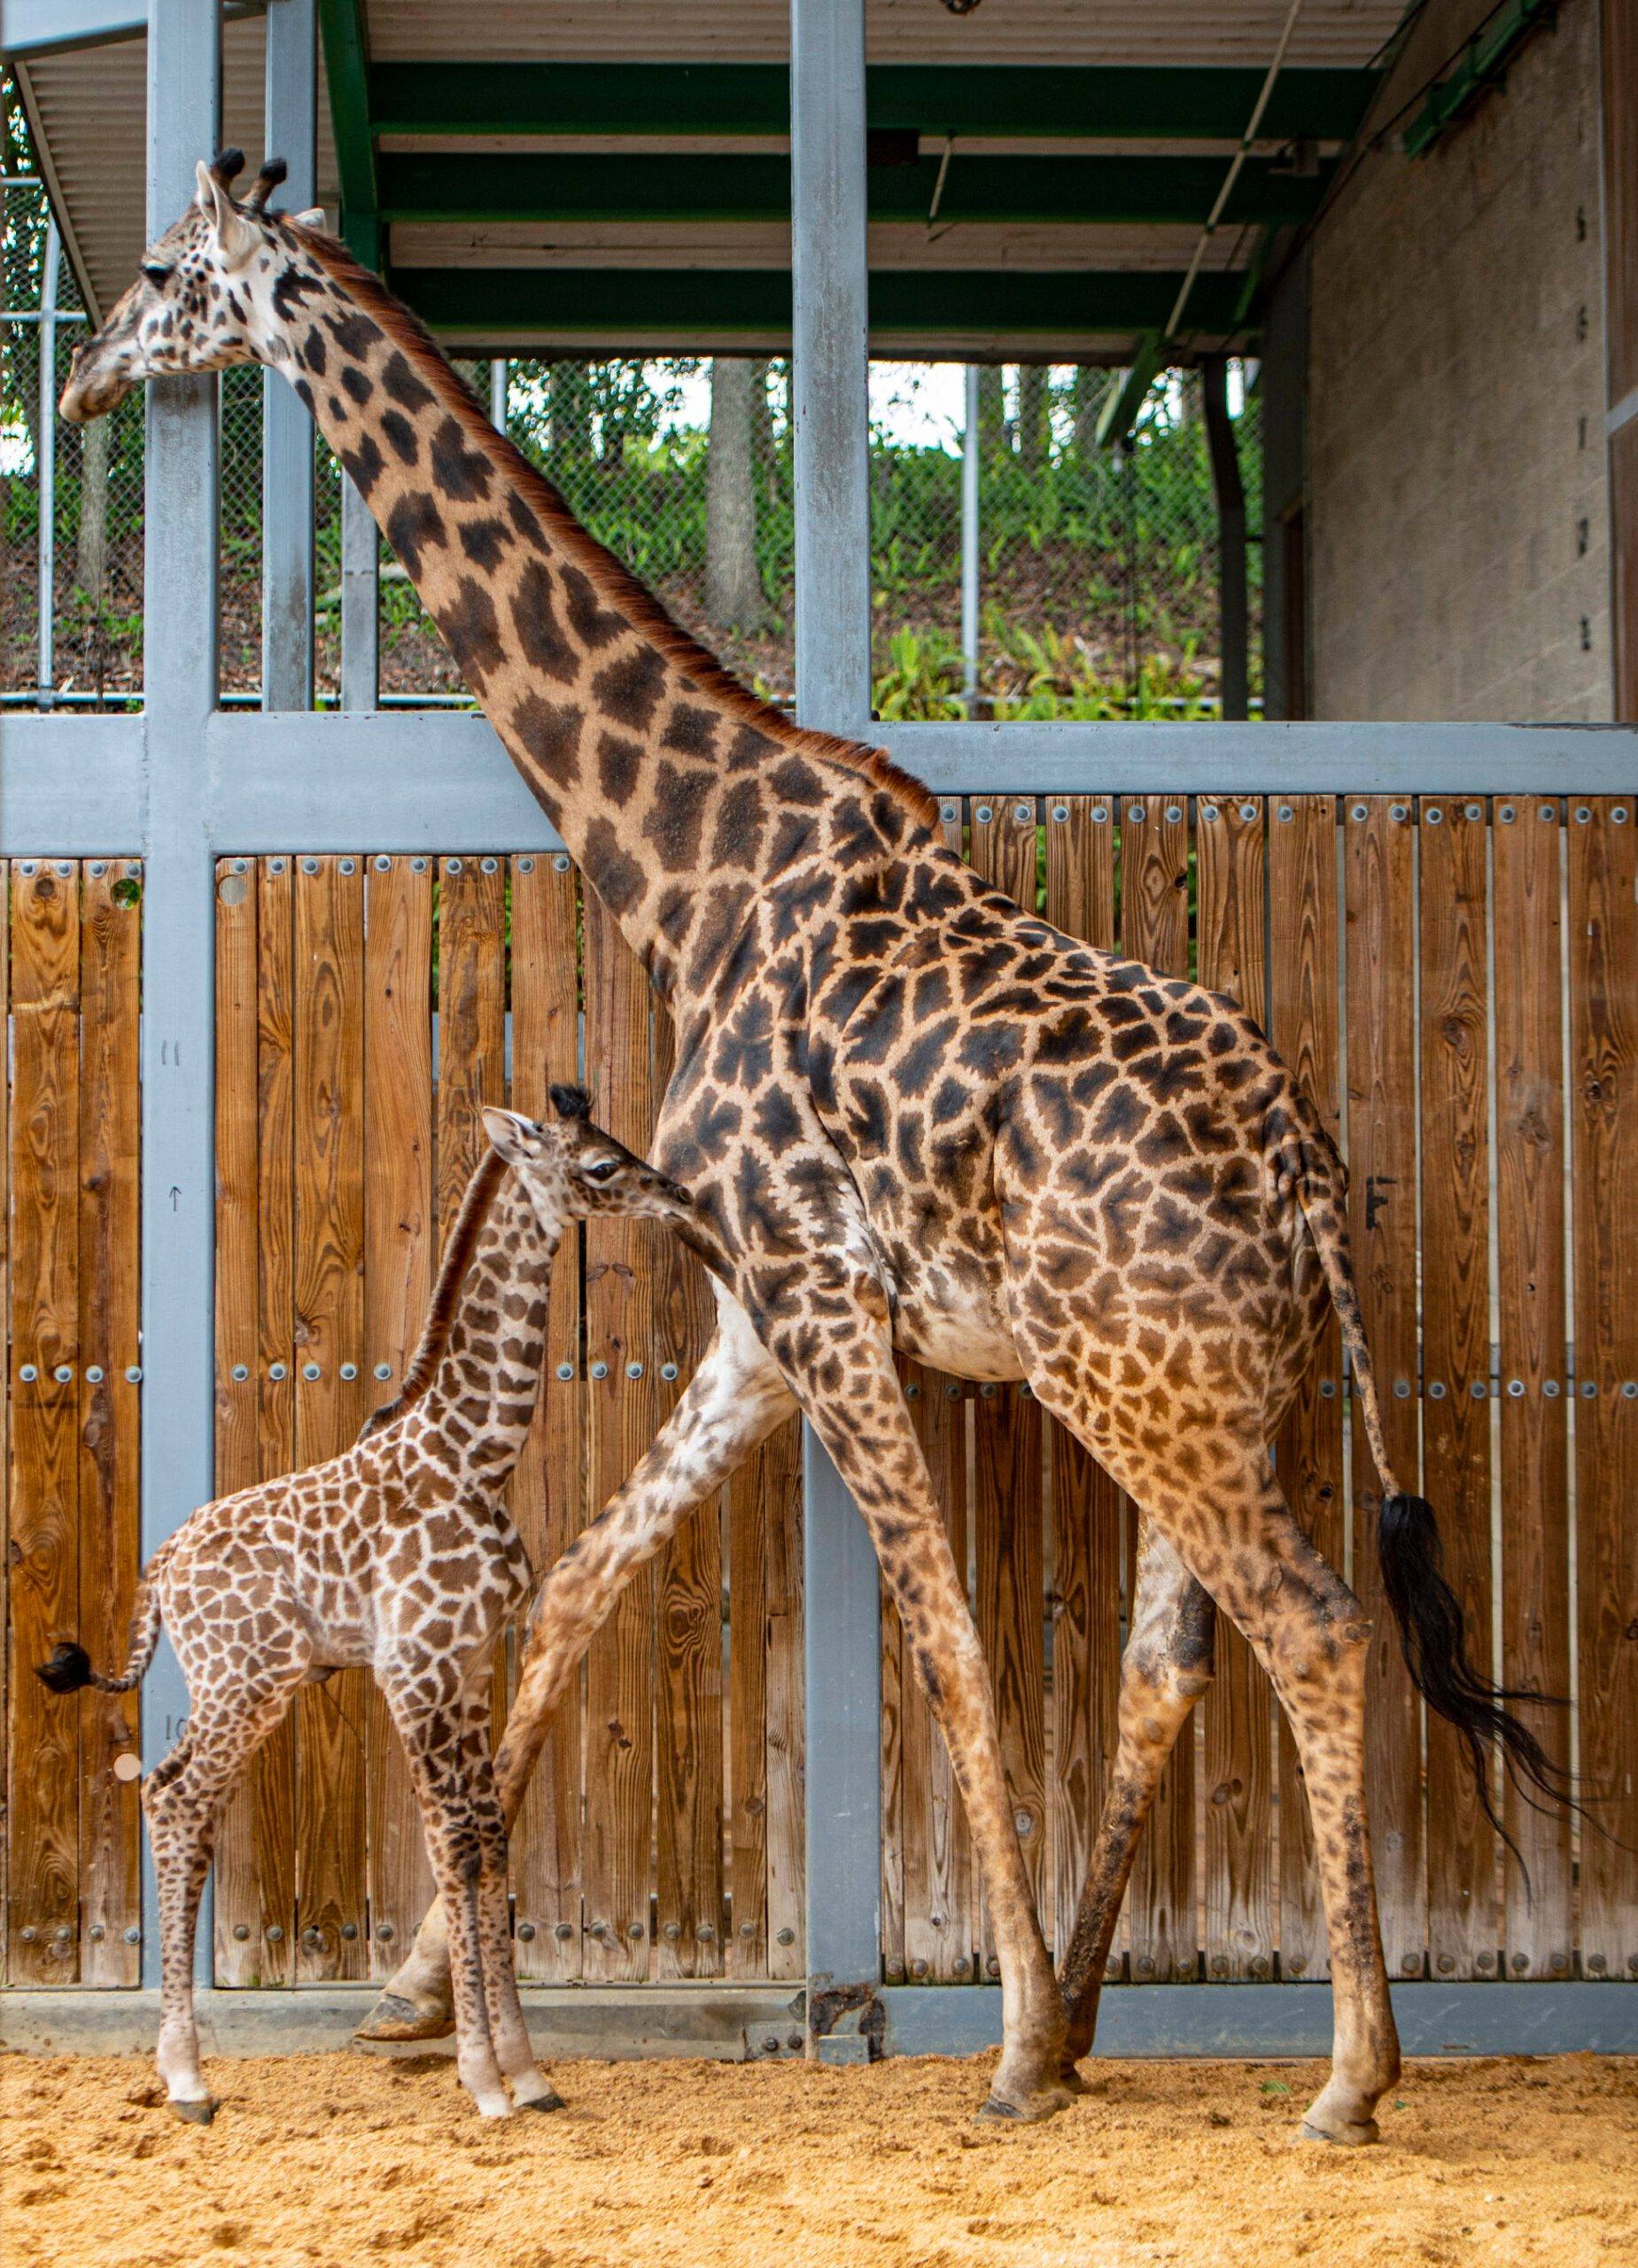 Disney's Animal Kingdom breeding program success continues with a third giraffe birth at the park in the past year